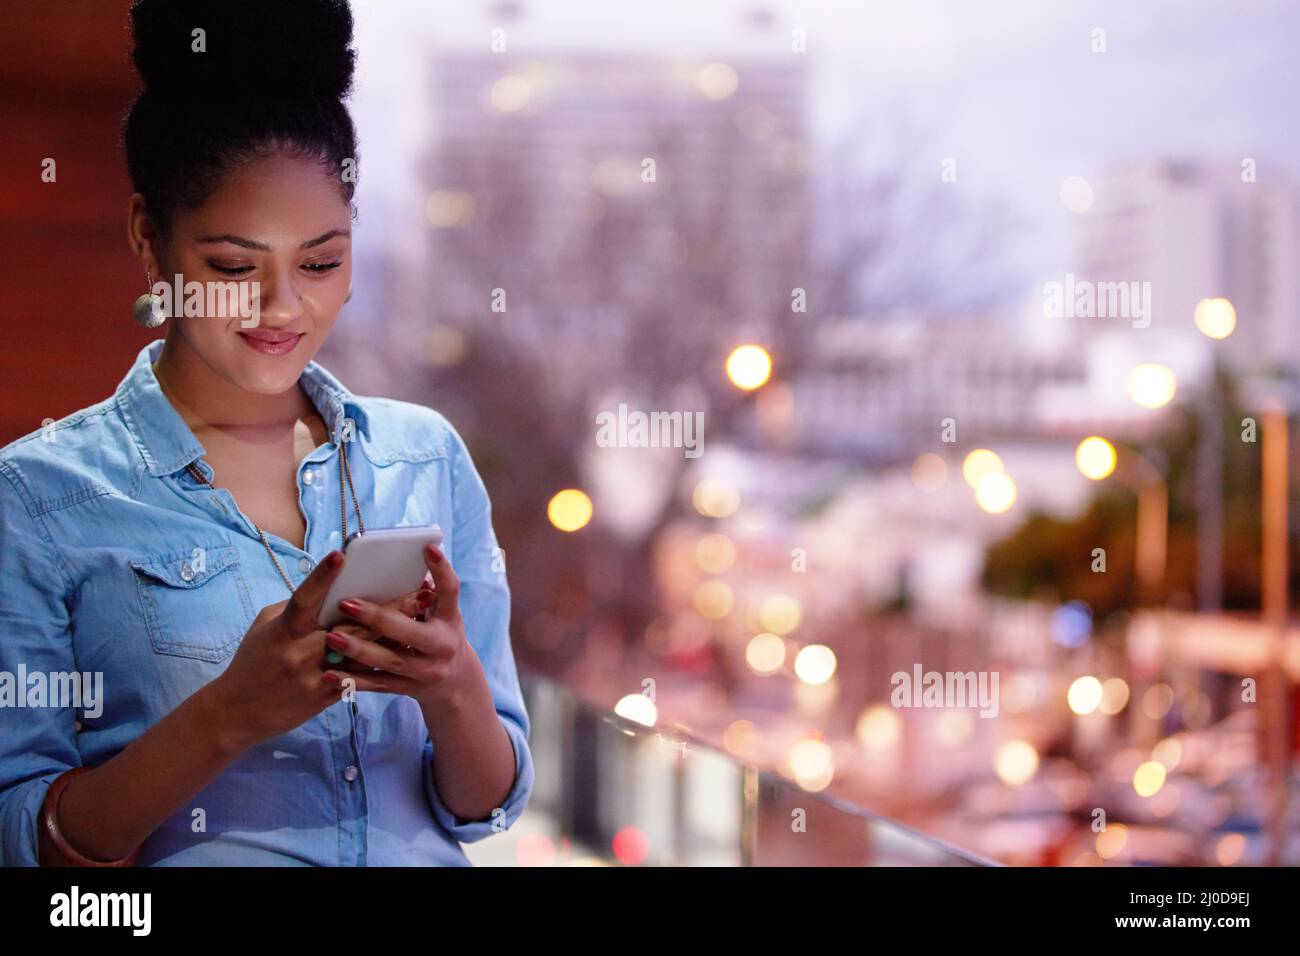 Connect to the world out there. Shot of an attractive young designer at work. Stock Photo